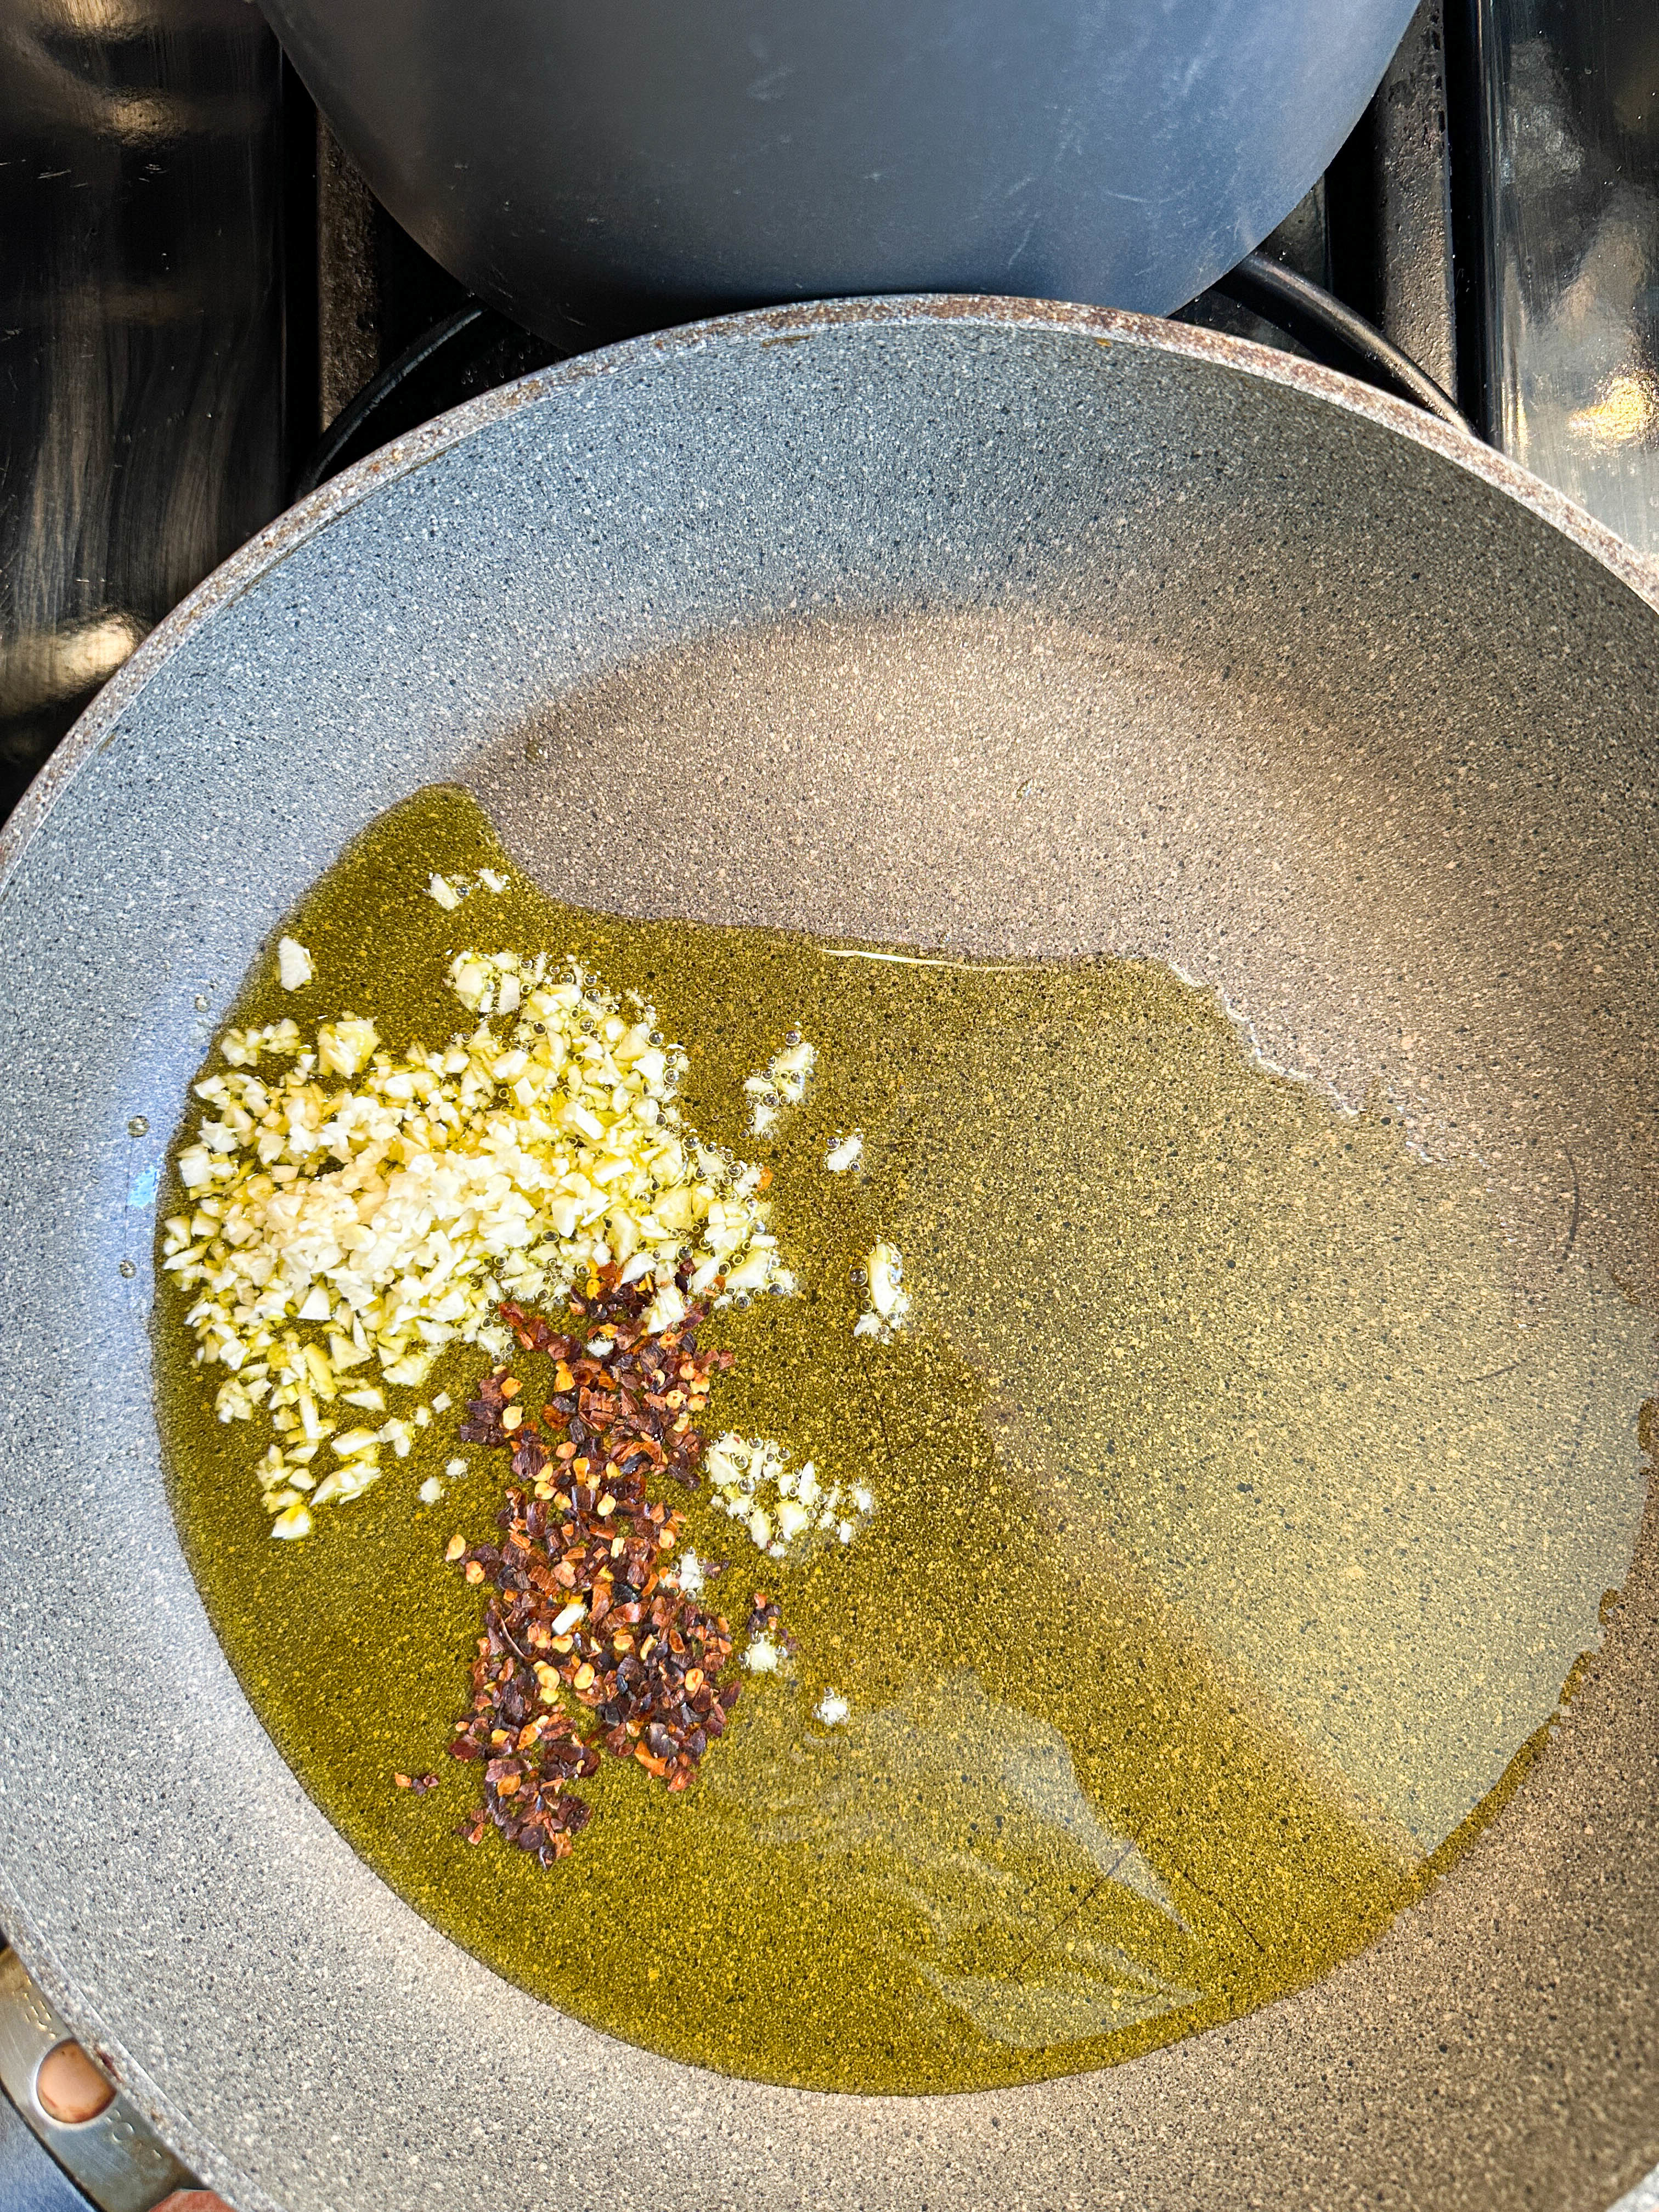 Oil, minced garlic, and chili flakes in a frying pan